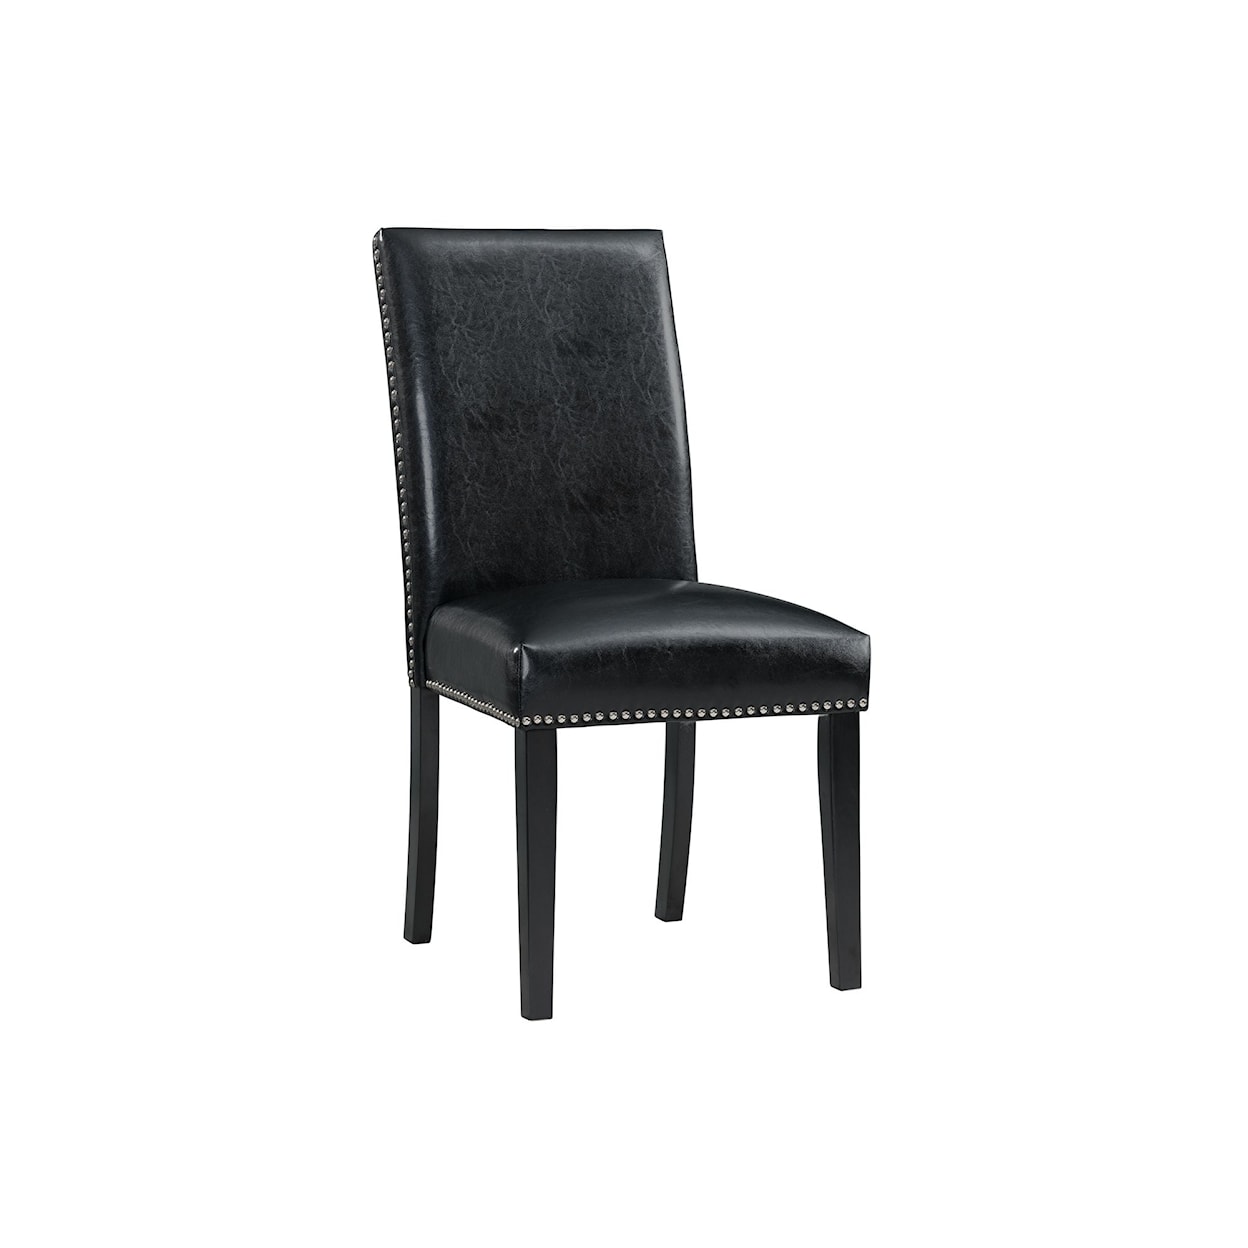 Elements International Meridian Set of 2 Side Chairs